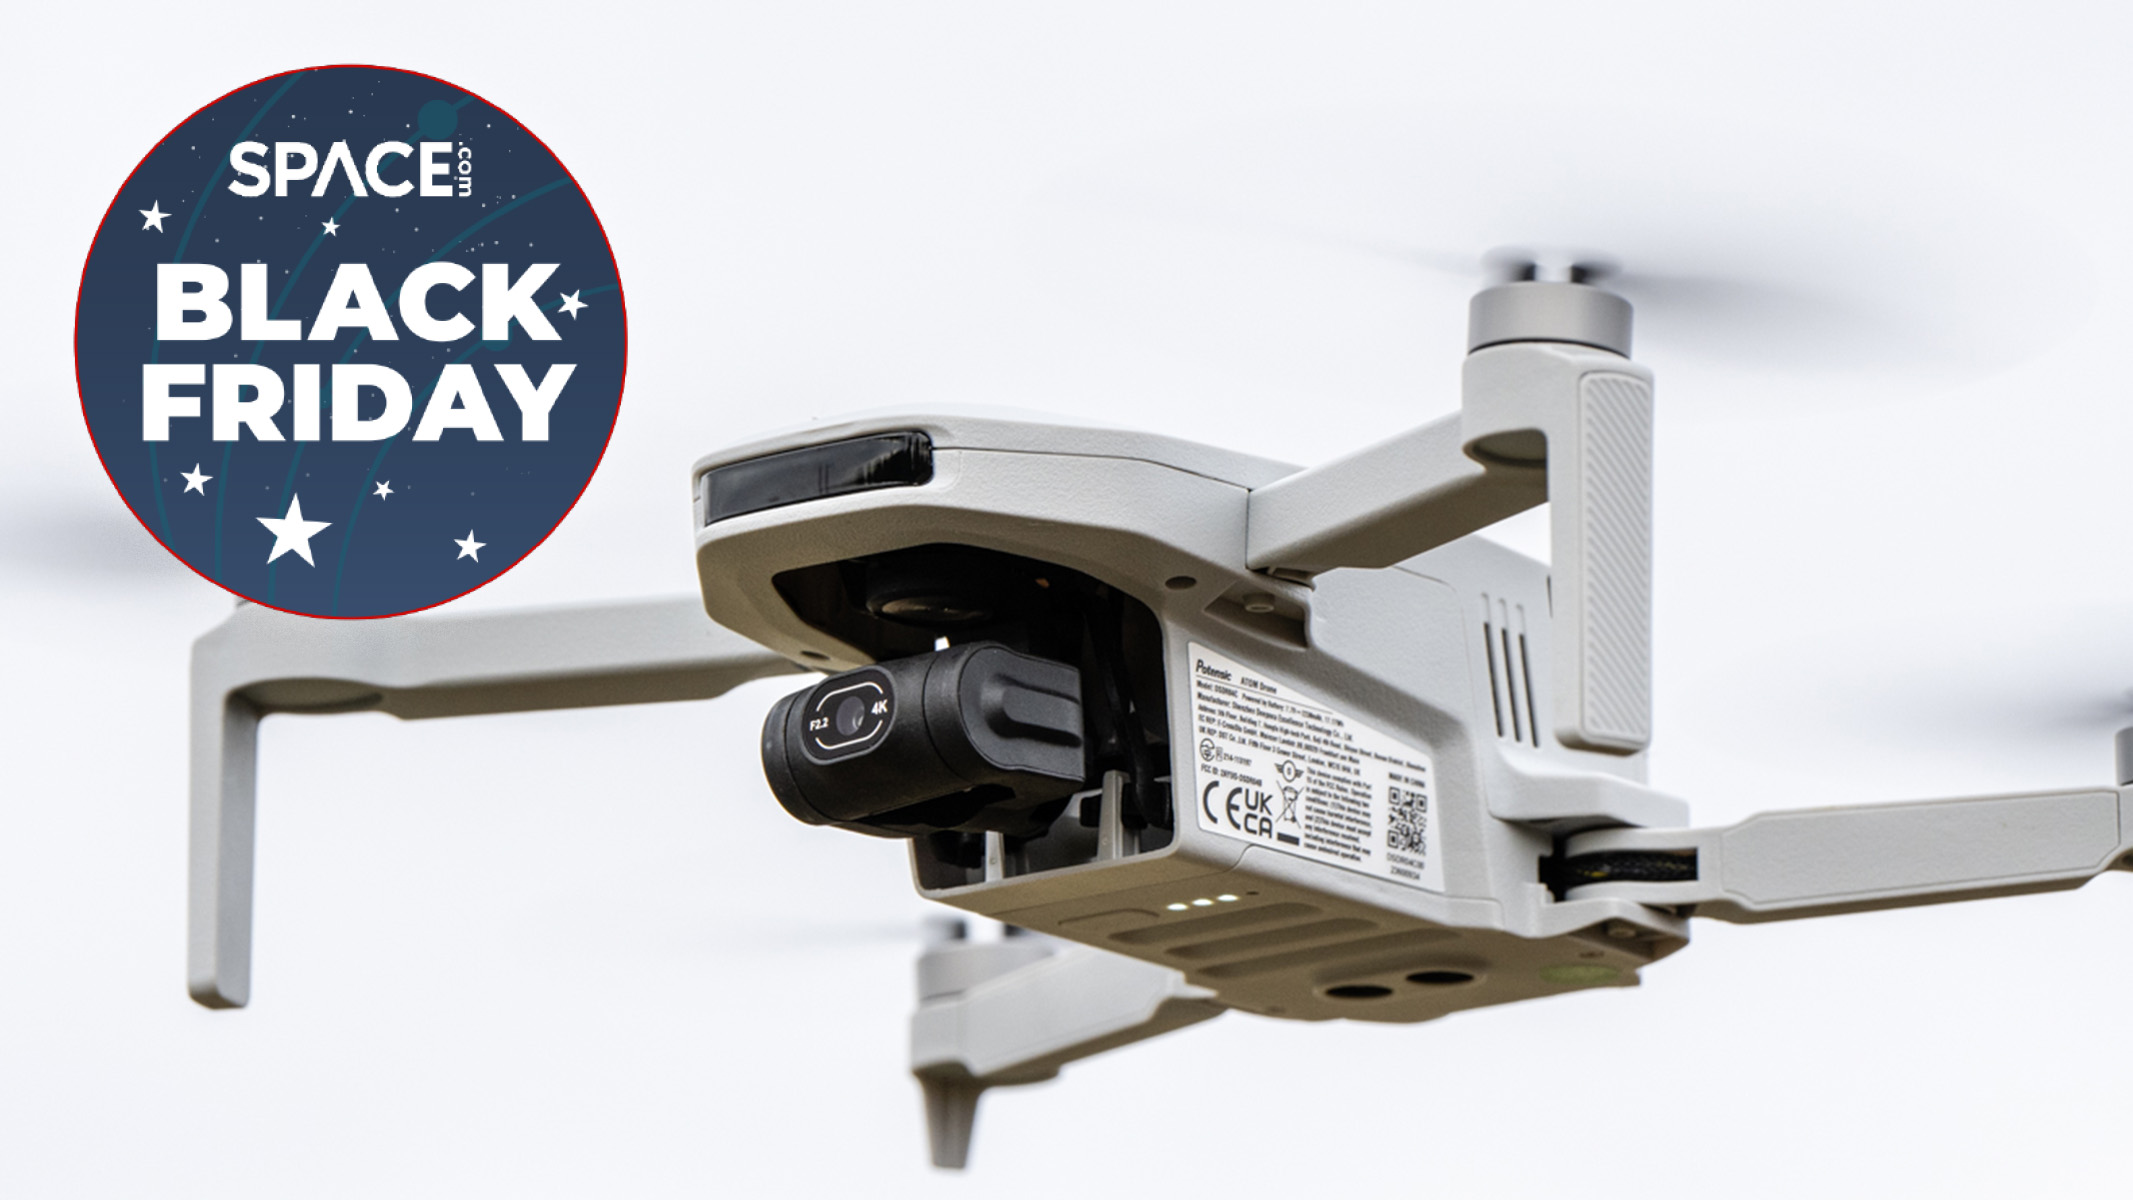 Black Friday weekend: Save $80 on this fantastic Potensic ATOM drone